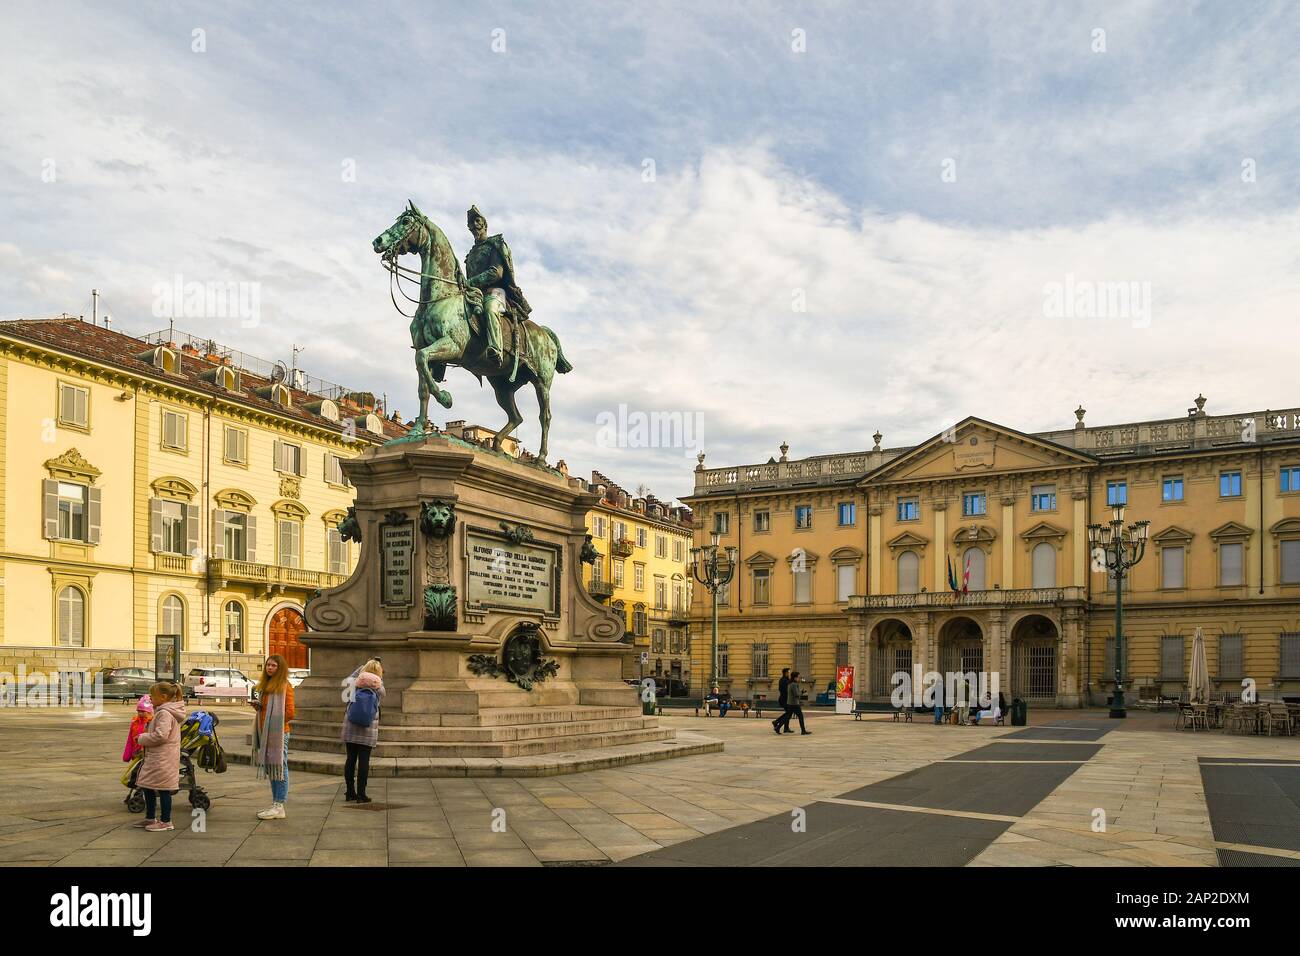 View of Piazza Giambattista Bodoni with the Monument to Alfonso Lamarmora and the façade of Giuseppe Verdi Conservatory, Turin, Piedmont, Italy Stock Photo